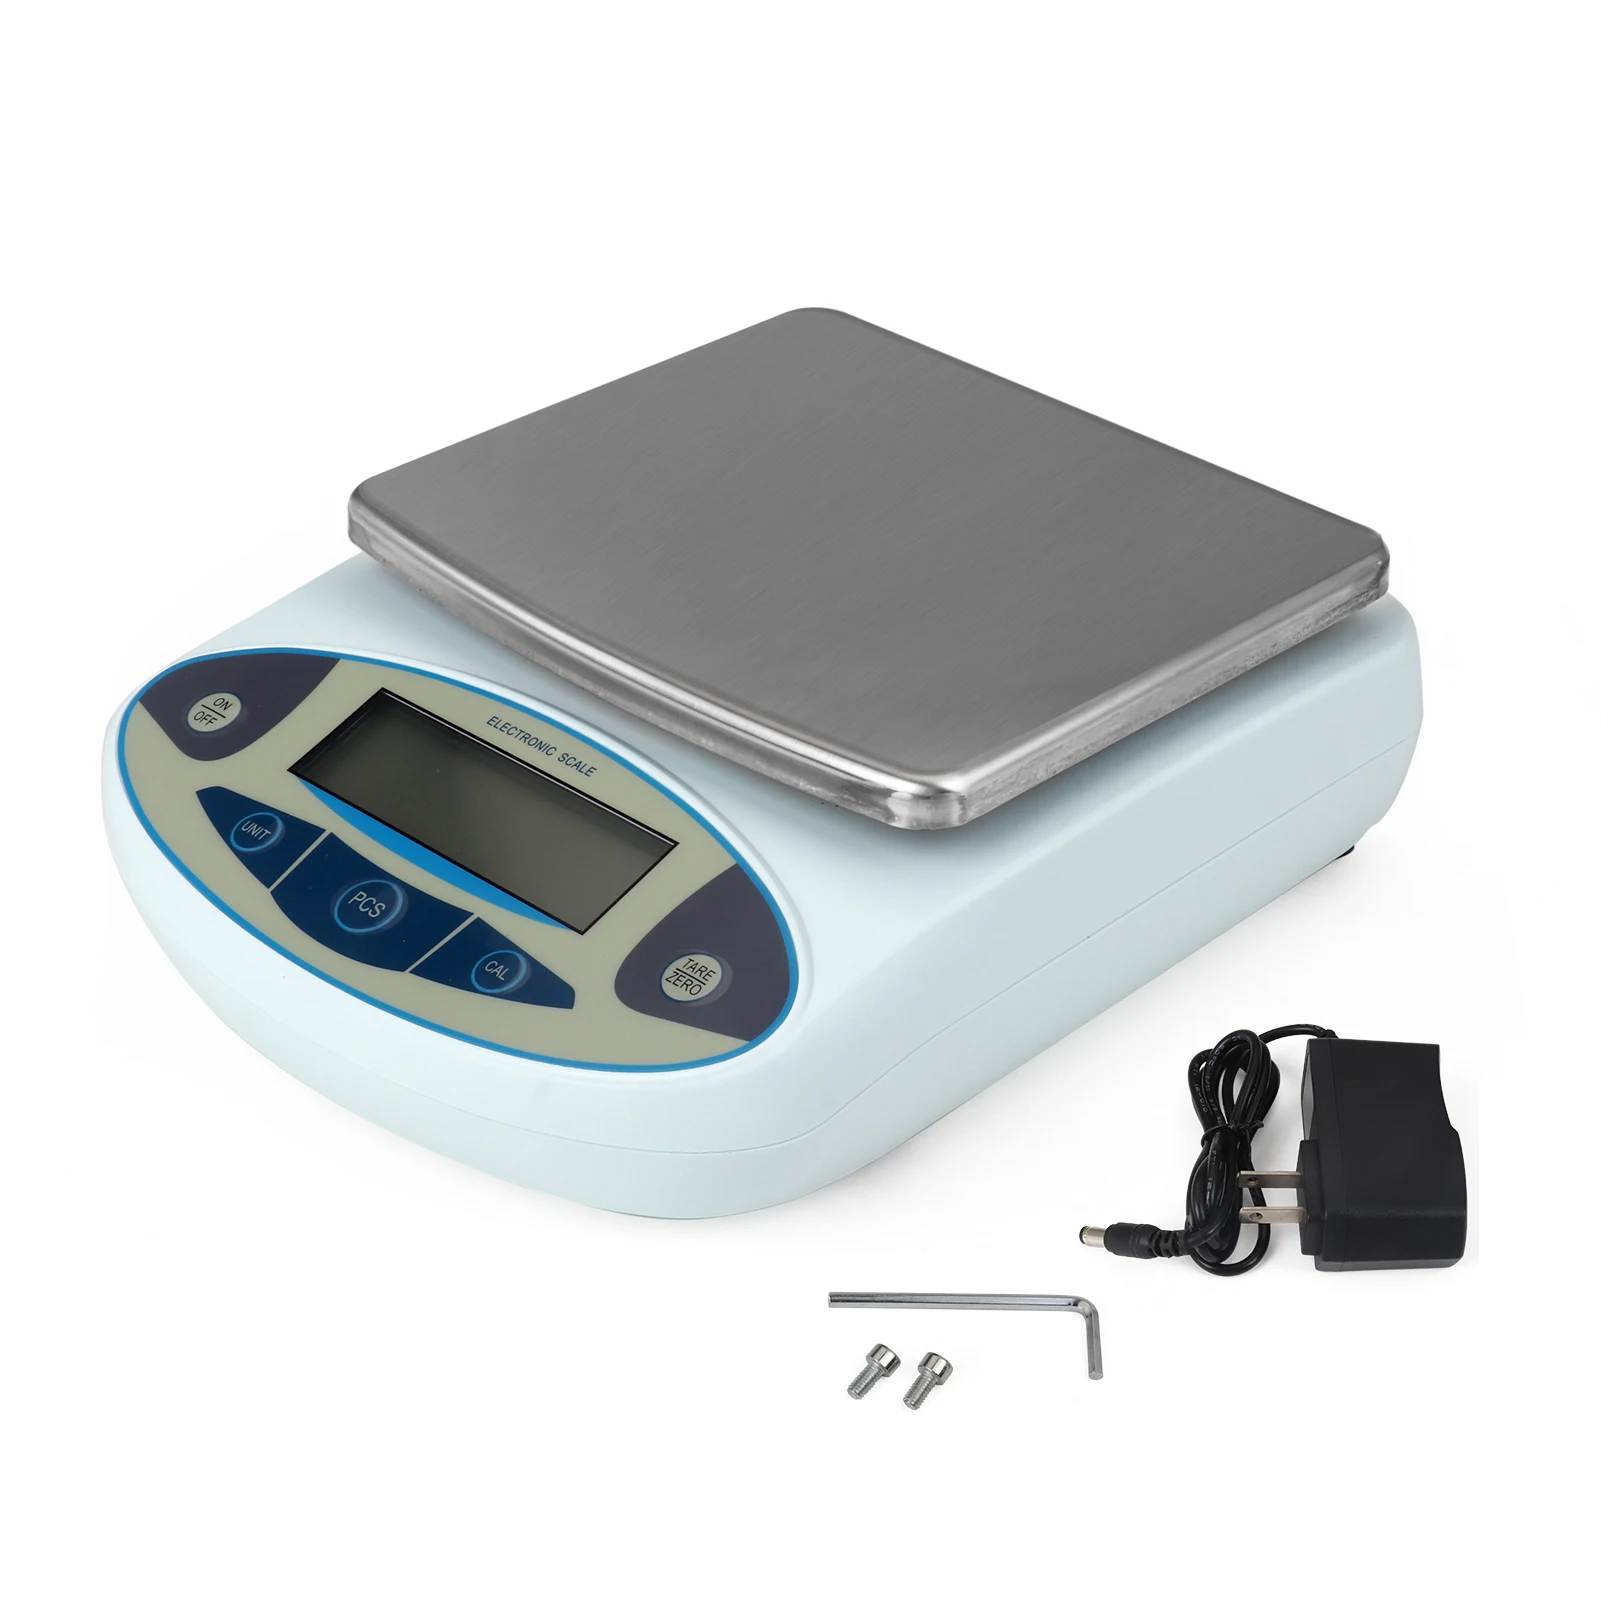 

NEW Kitchen Scale 5000g x 0.01g Lab Analytical Balance W/ LCD Backlit Screen Digital Weight Mini Precision Pocket Electronic